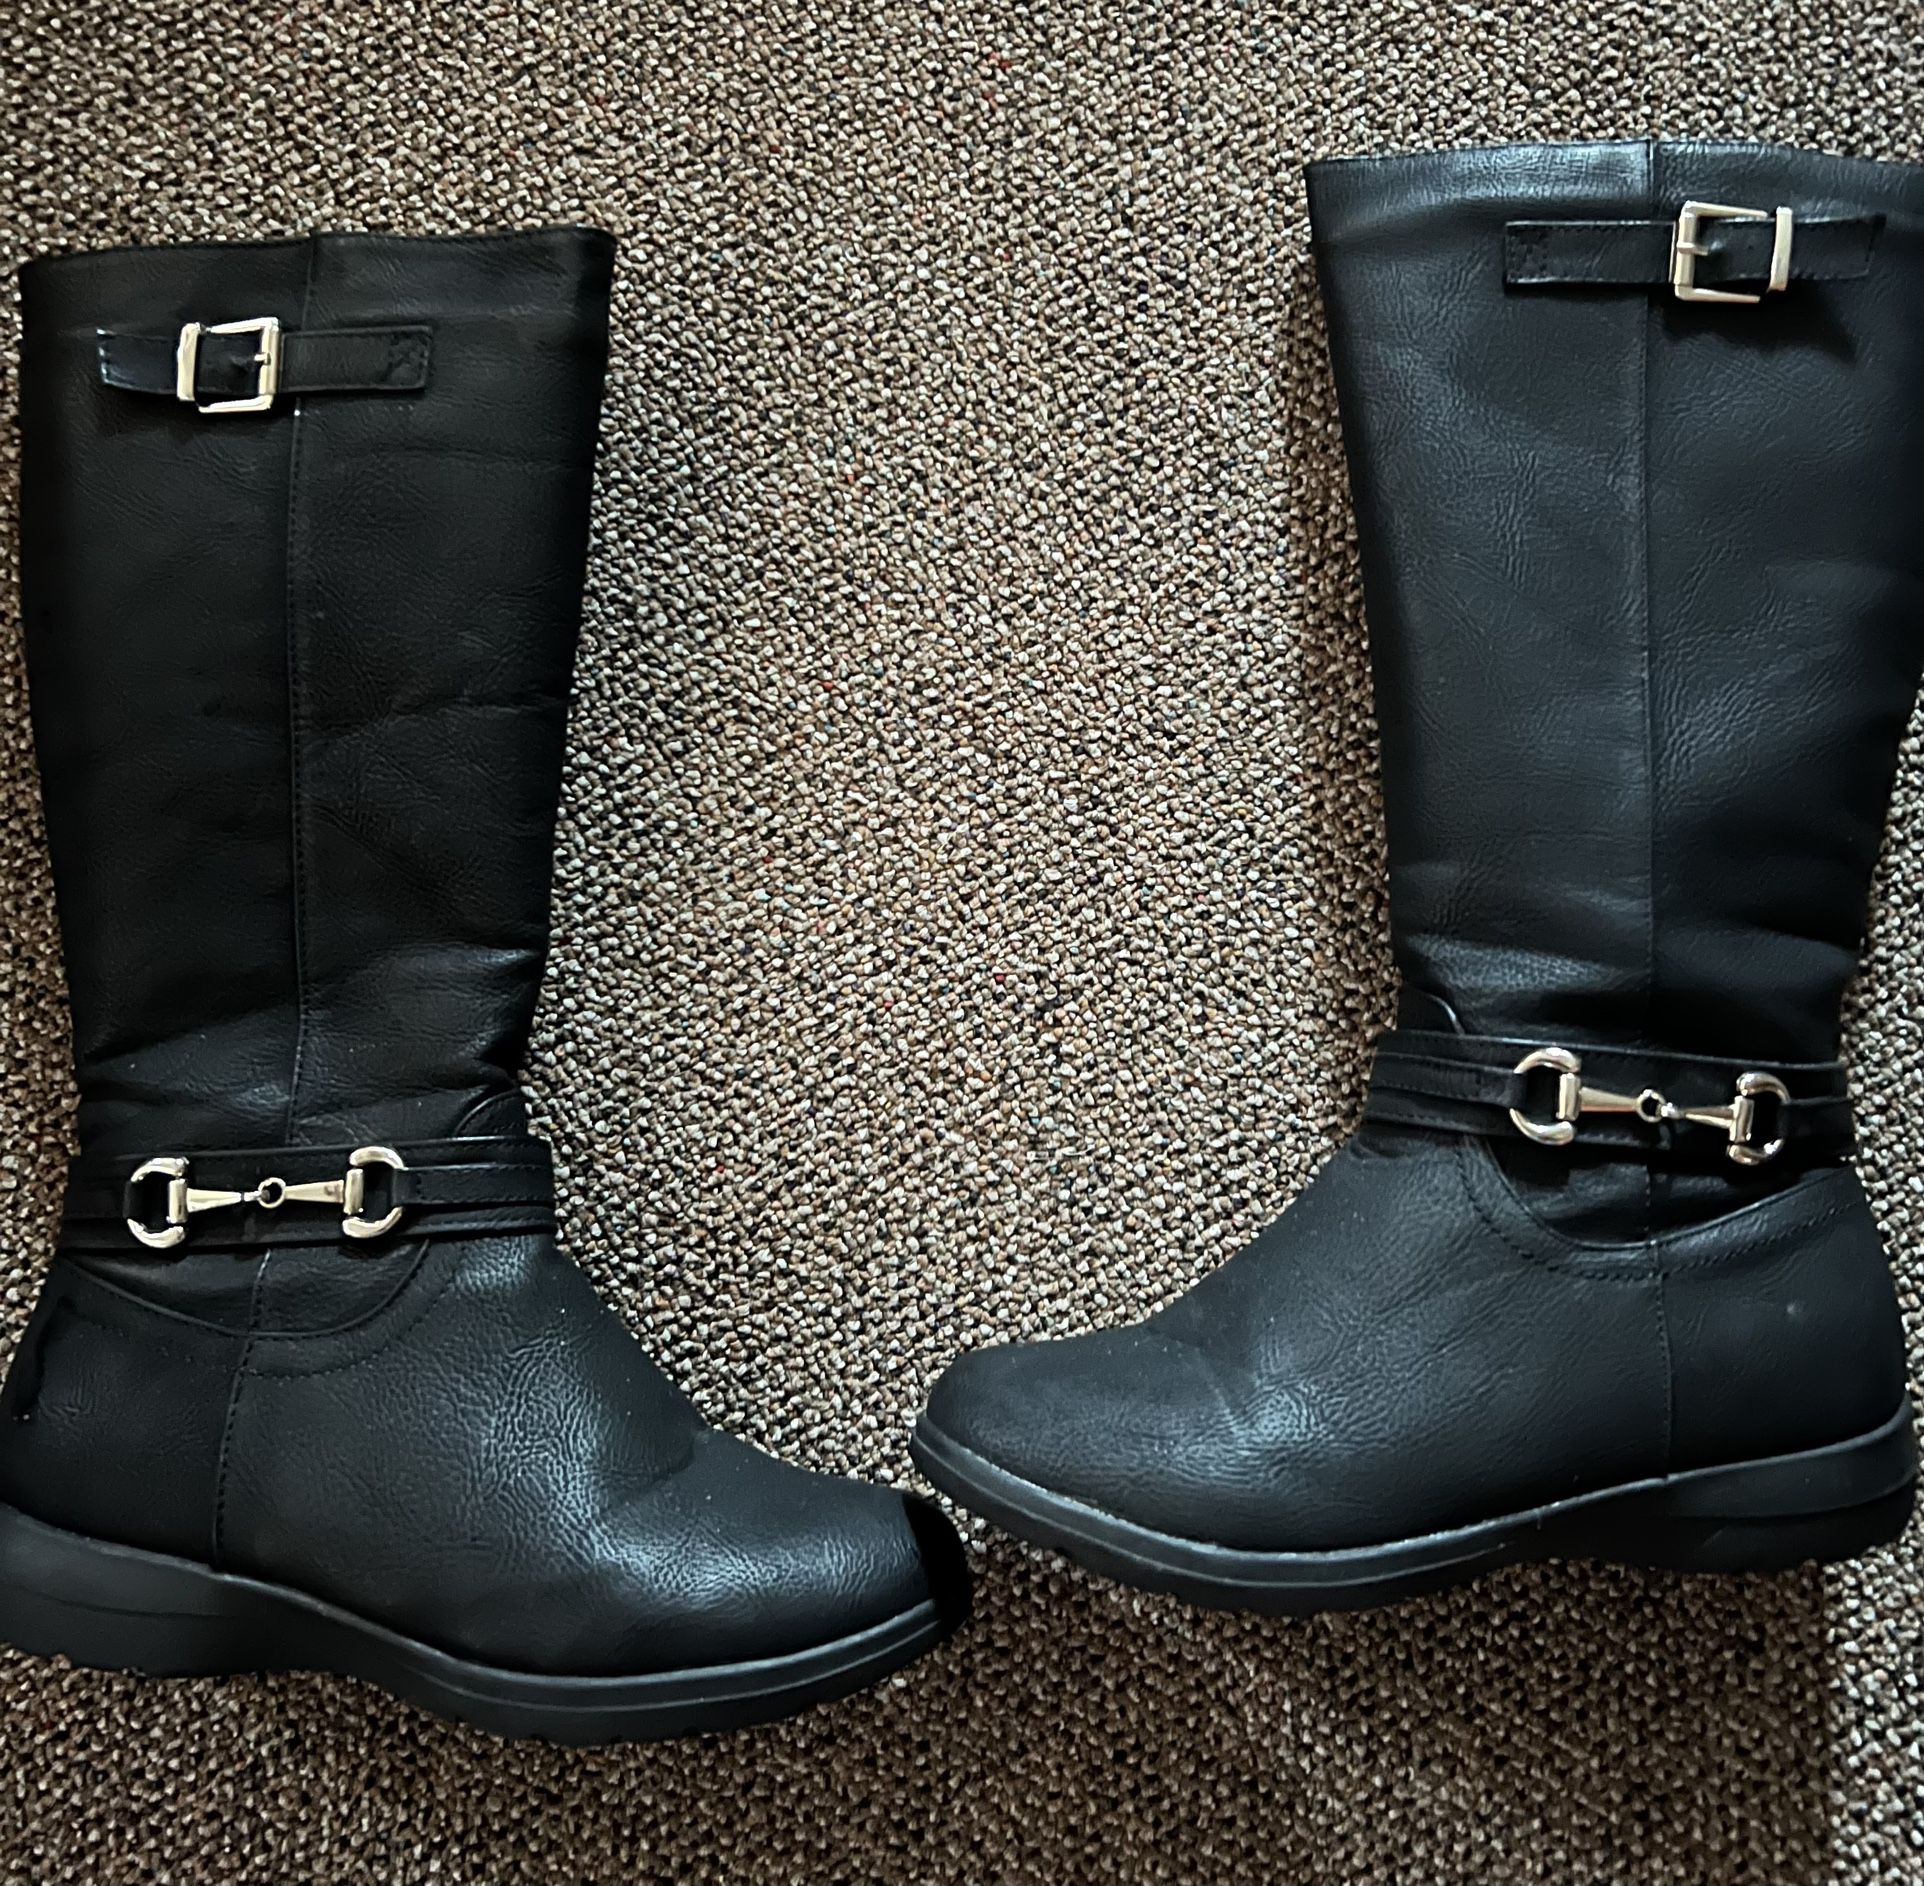 2 Pair Of Black Boots